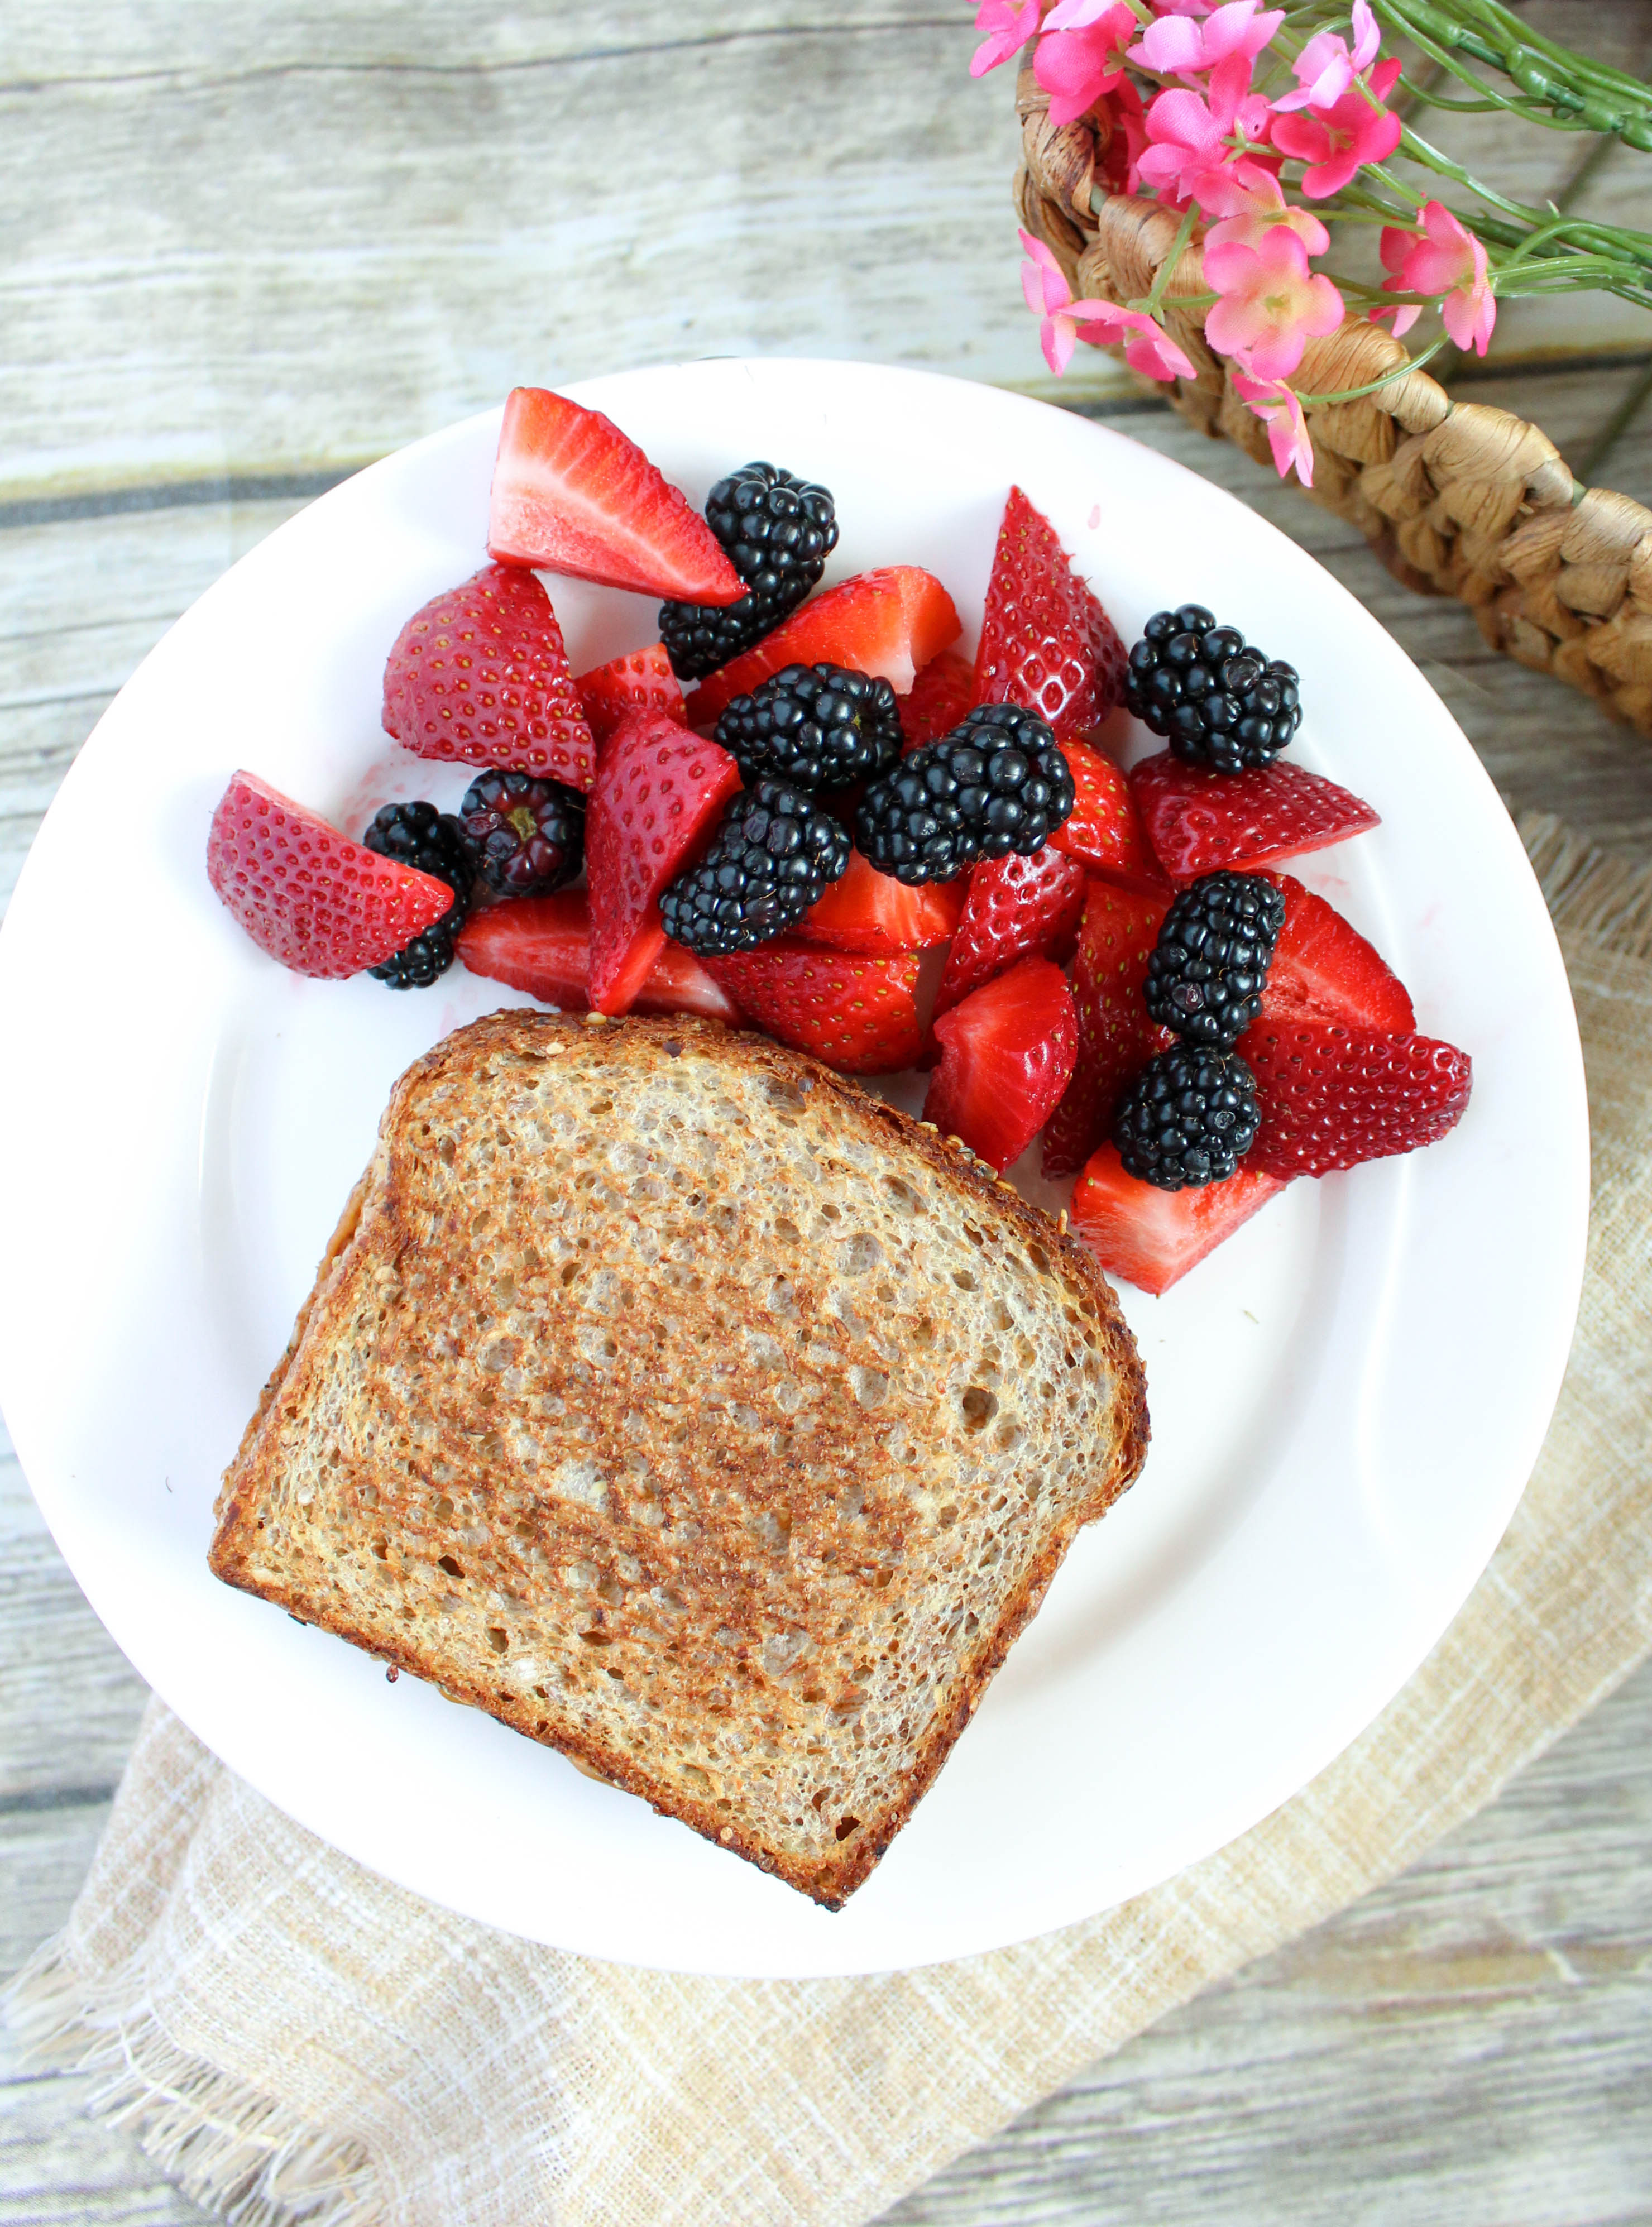 Grilled Sprouted Peanut Butter and Jelly Sandwich (THM-E, Low Fat)